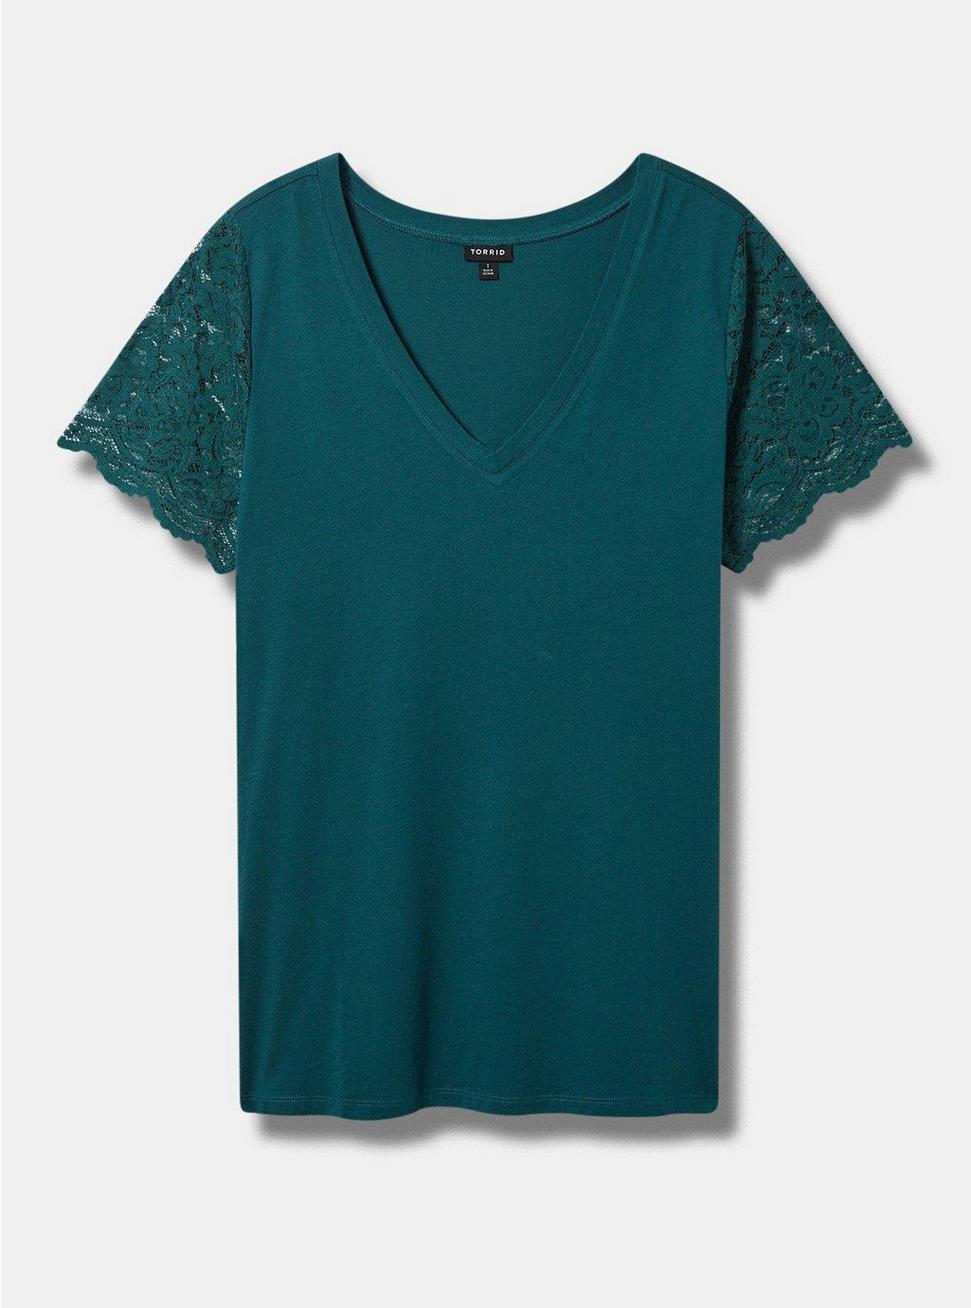 Plus Size Classic Fit Cotton-Blend V-Neck Lace Sleeve Tee, DEEP TEAL, hi-res